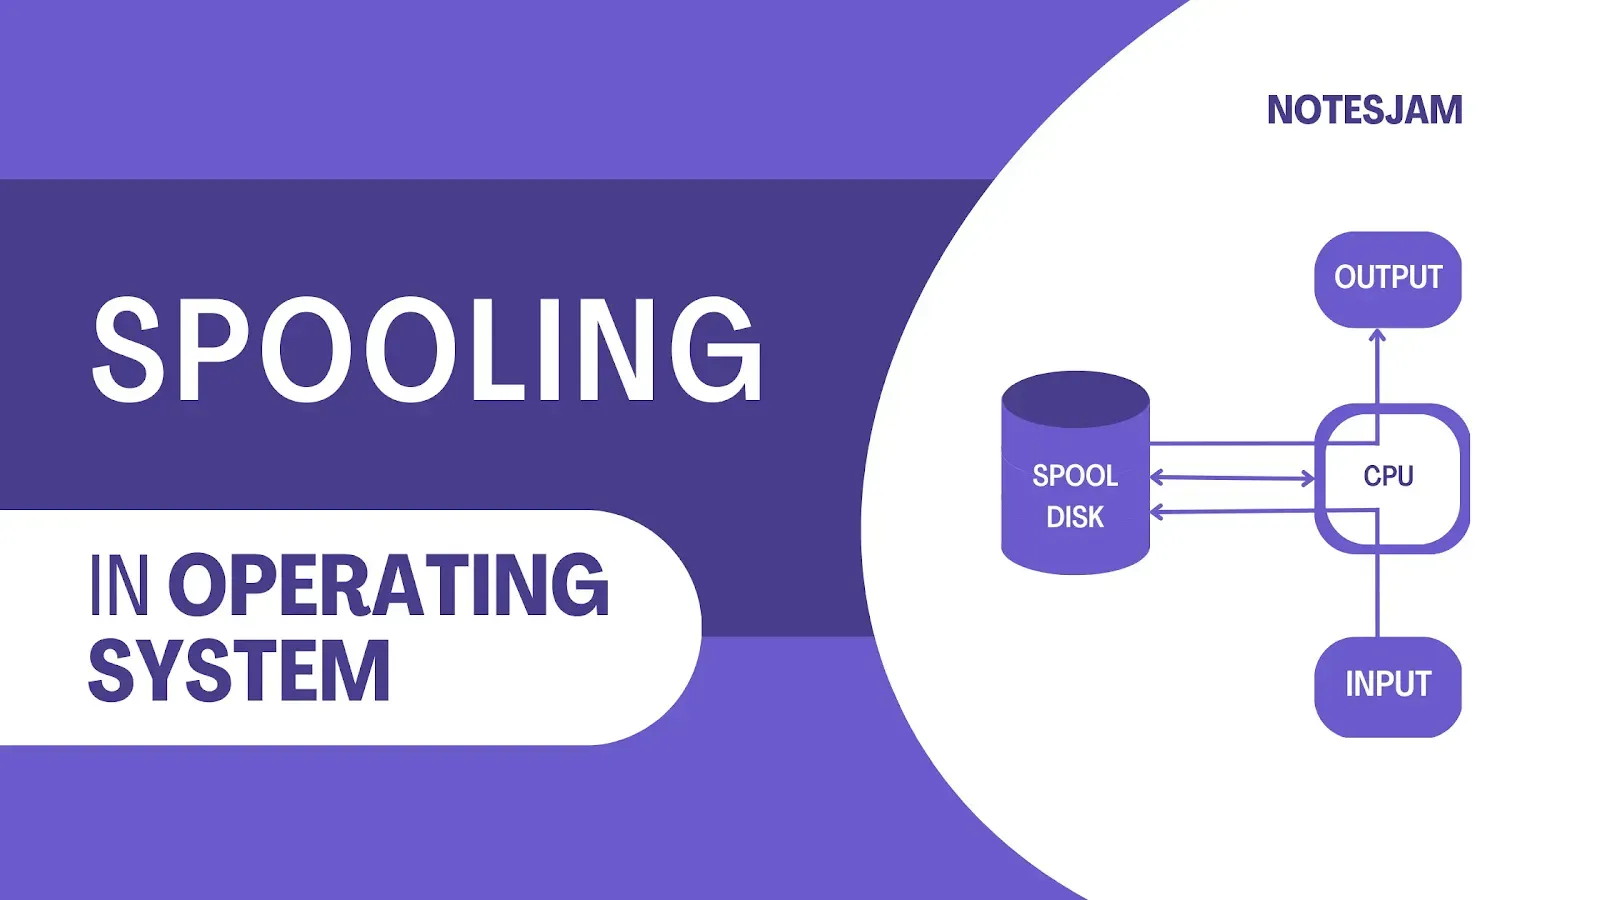 Spooling in operating system